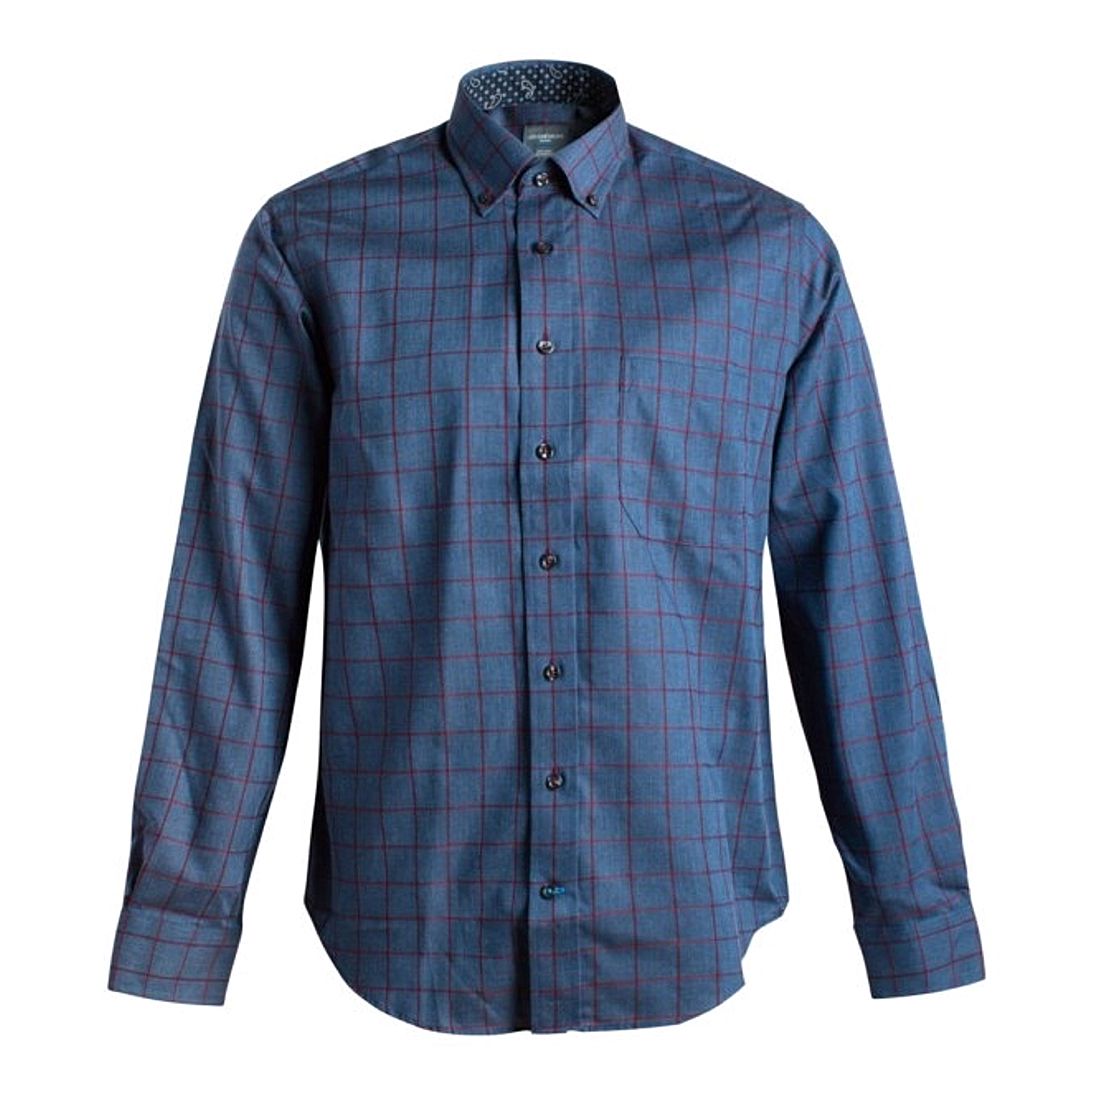 Blue and Red Herringbone Check No-Iron Cotton Sport Shirt with Button Down Collar by Leo Chevalier